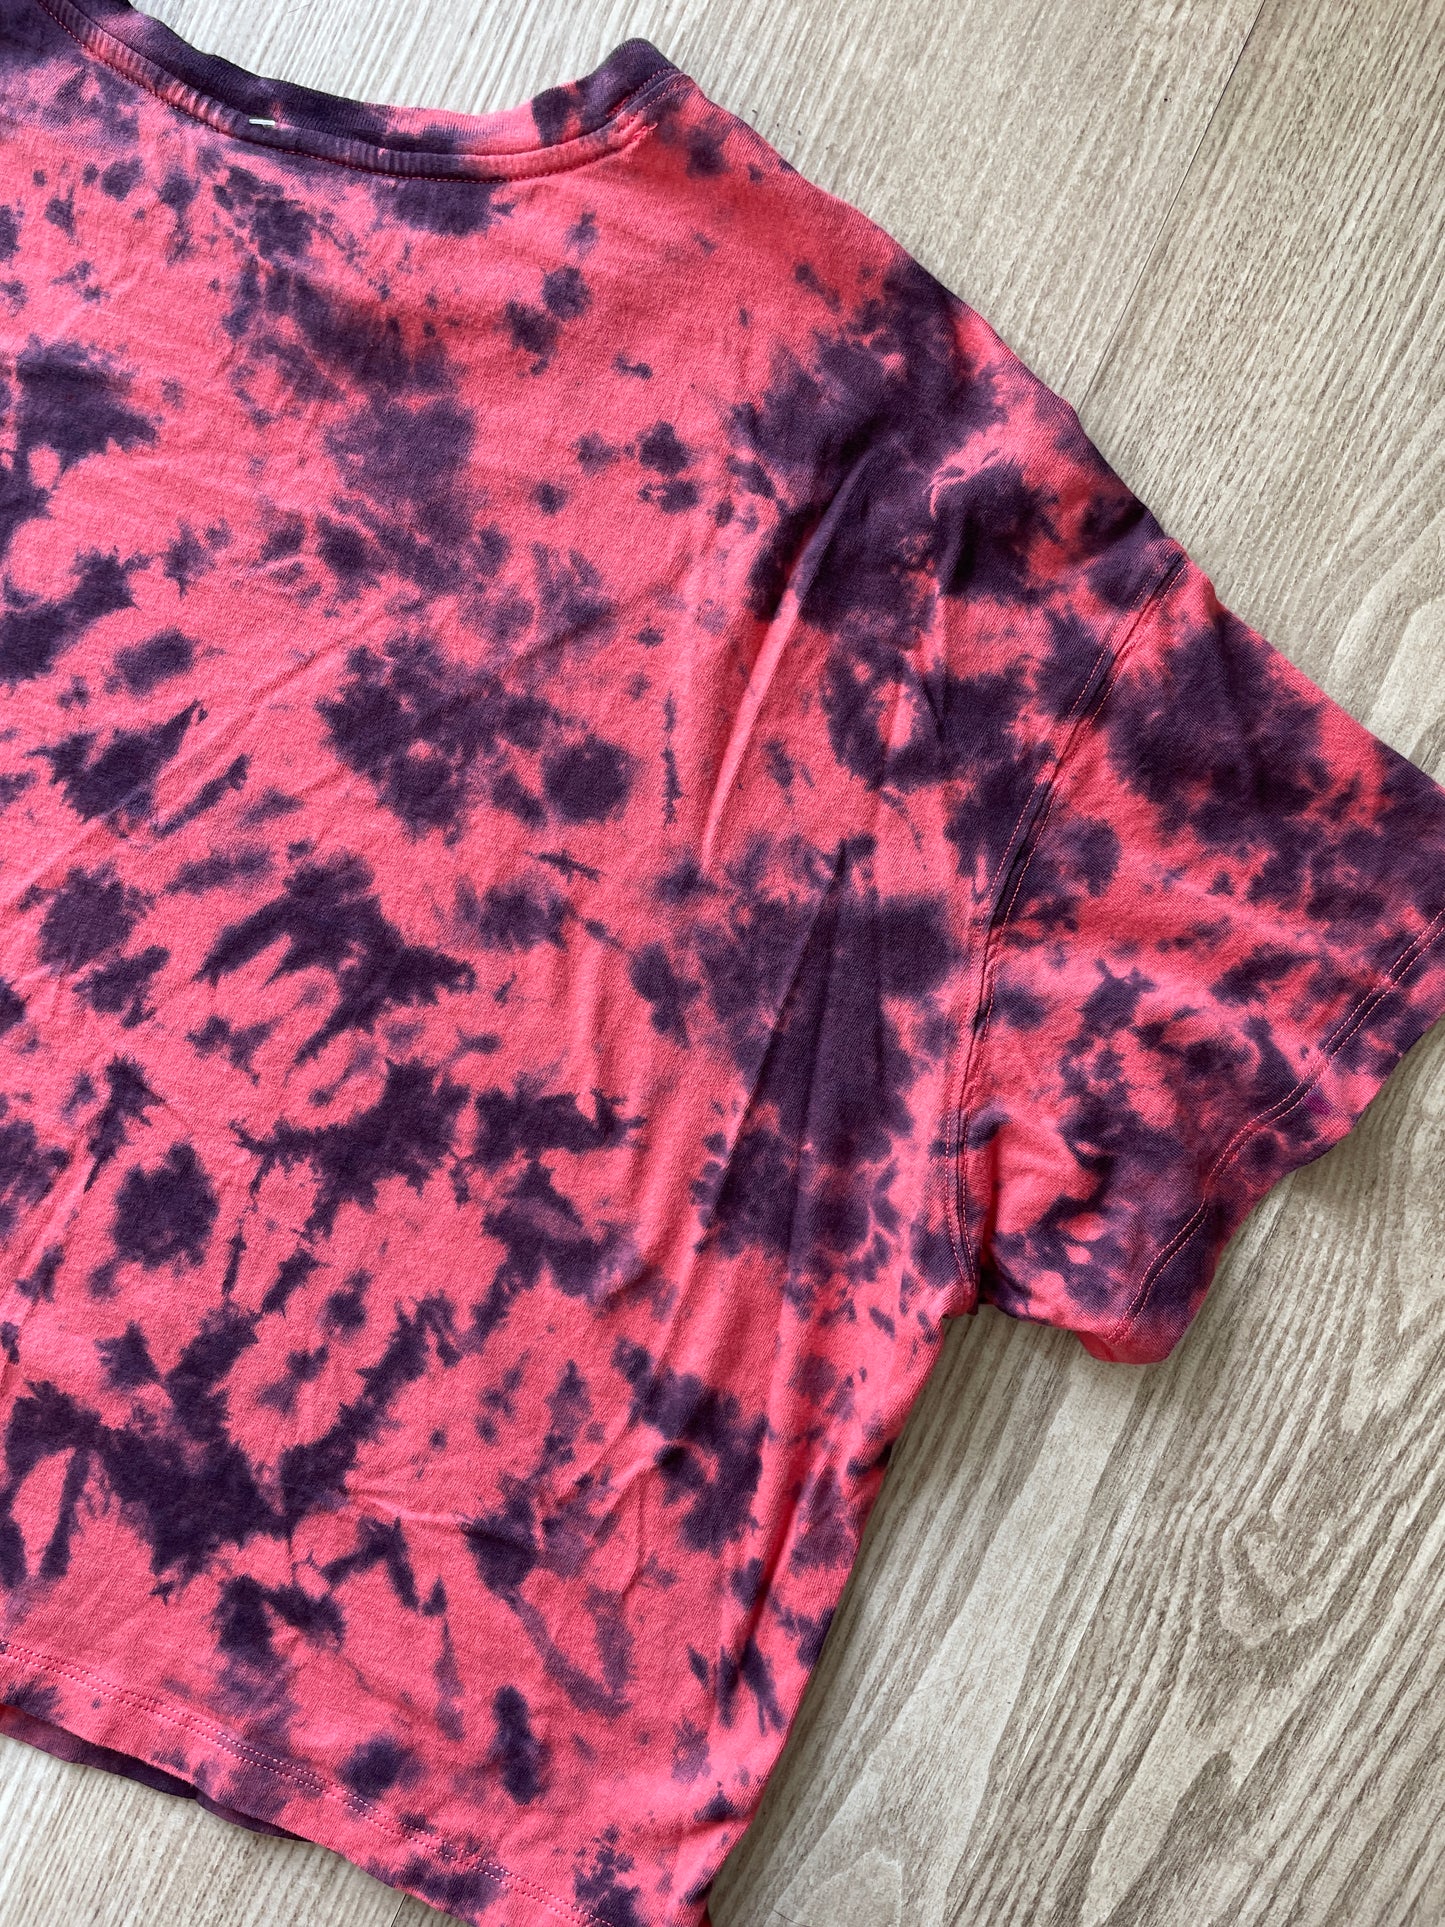 XL Women’s Climbing Shoe Handmade Tie Dyed Crop Top | One-Of-a-Kind Red and Black Cropped Short Sleeve T-Shirt